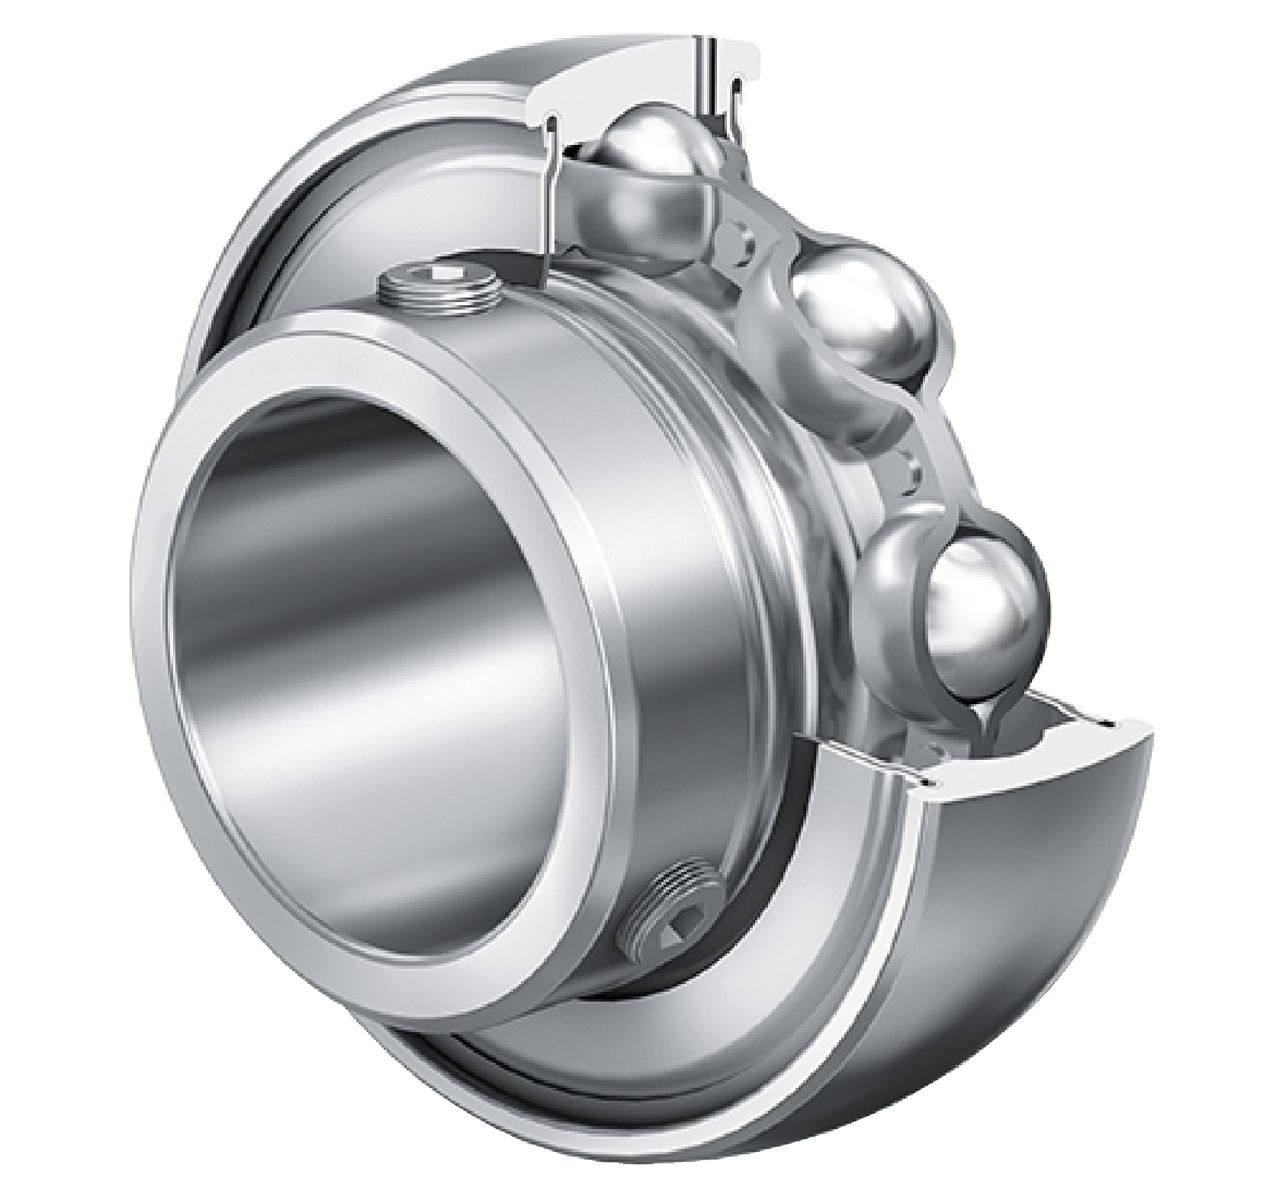 Radial Insert Ball Bearing GAY..-XL-NPP-B-FA164, Spherical Outer Ring, Grub Screws, P Seals on Both Sides, High Temperature